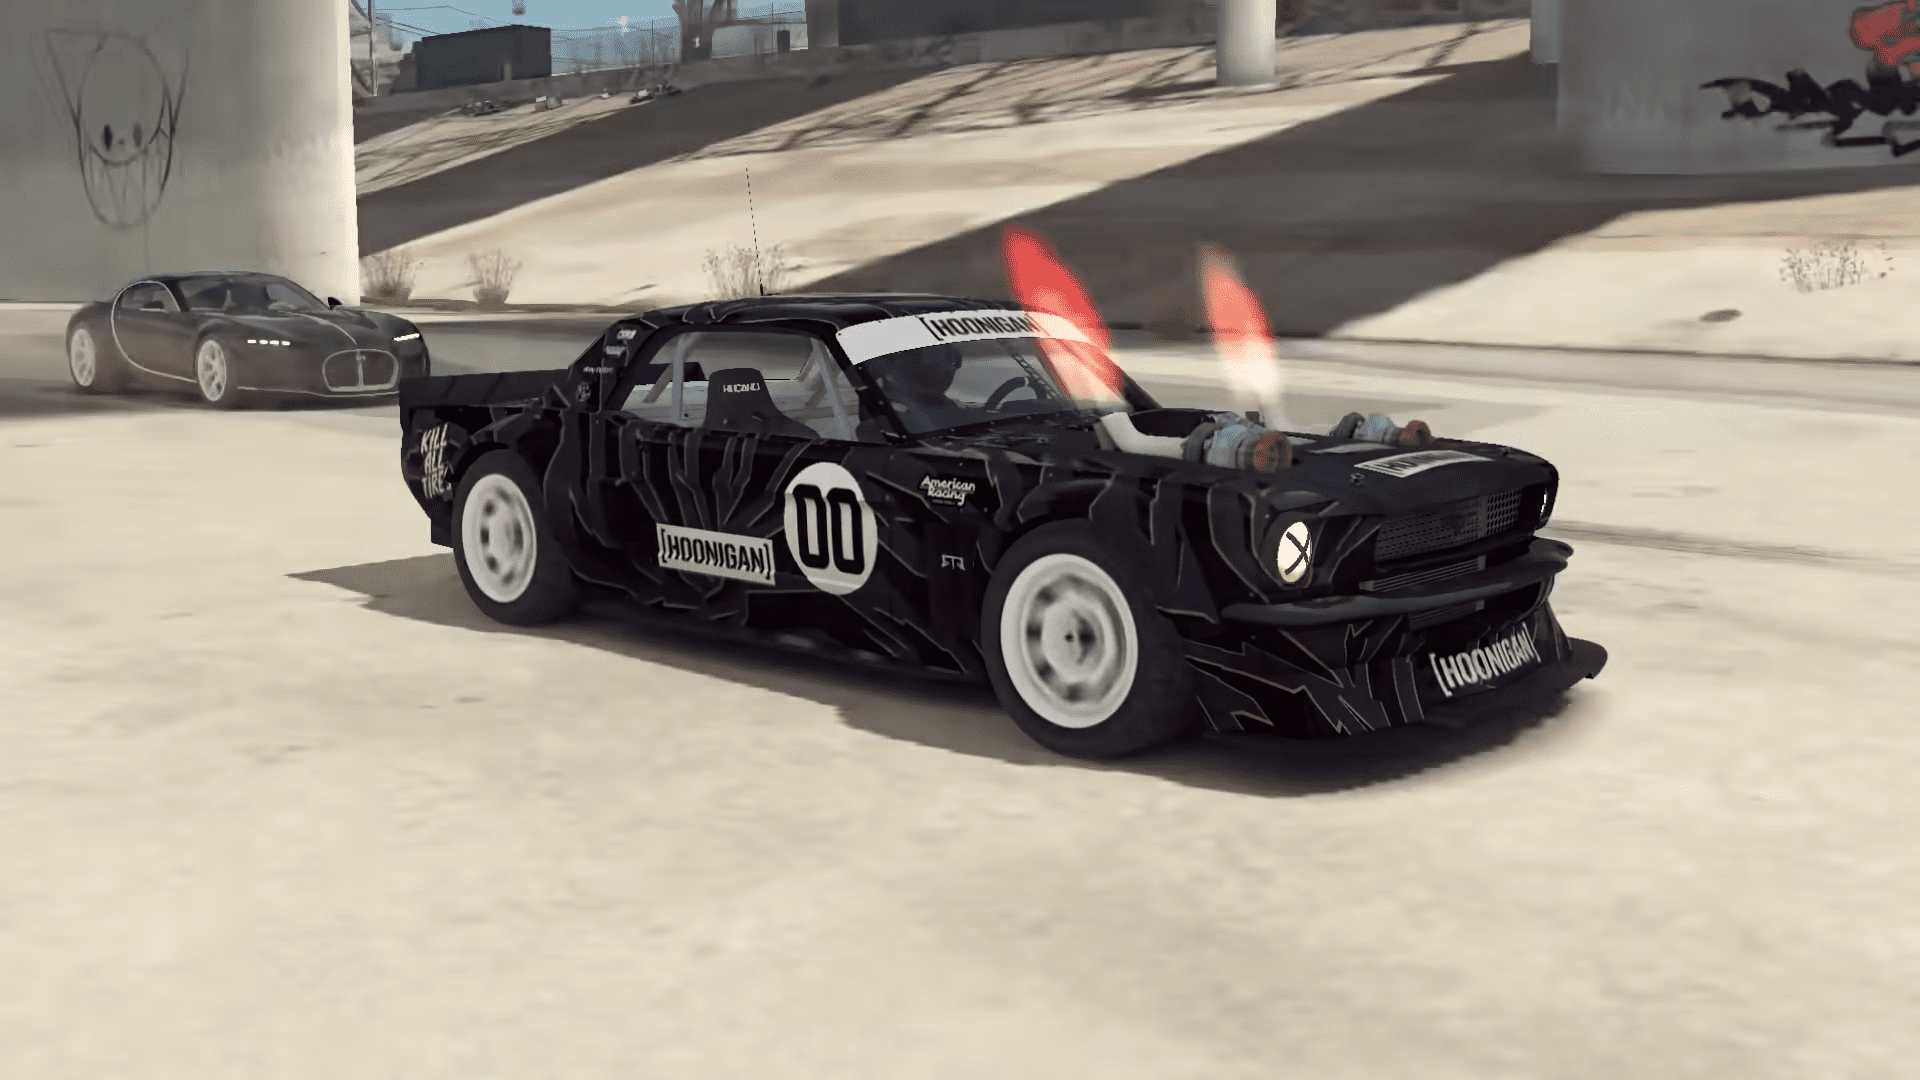 KEN BLOCK ANNOUNCES GYMKHANA SIX AND PARTNERSHIP WITH NEED FOR SPEED RIVALS  